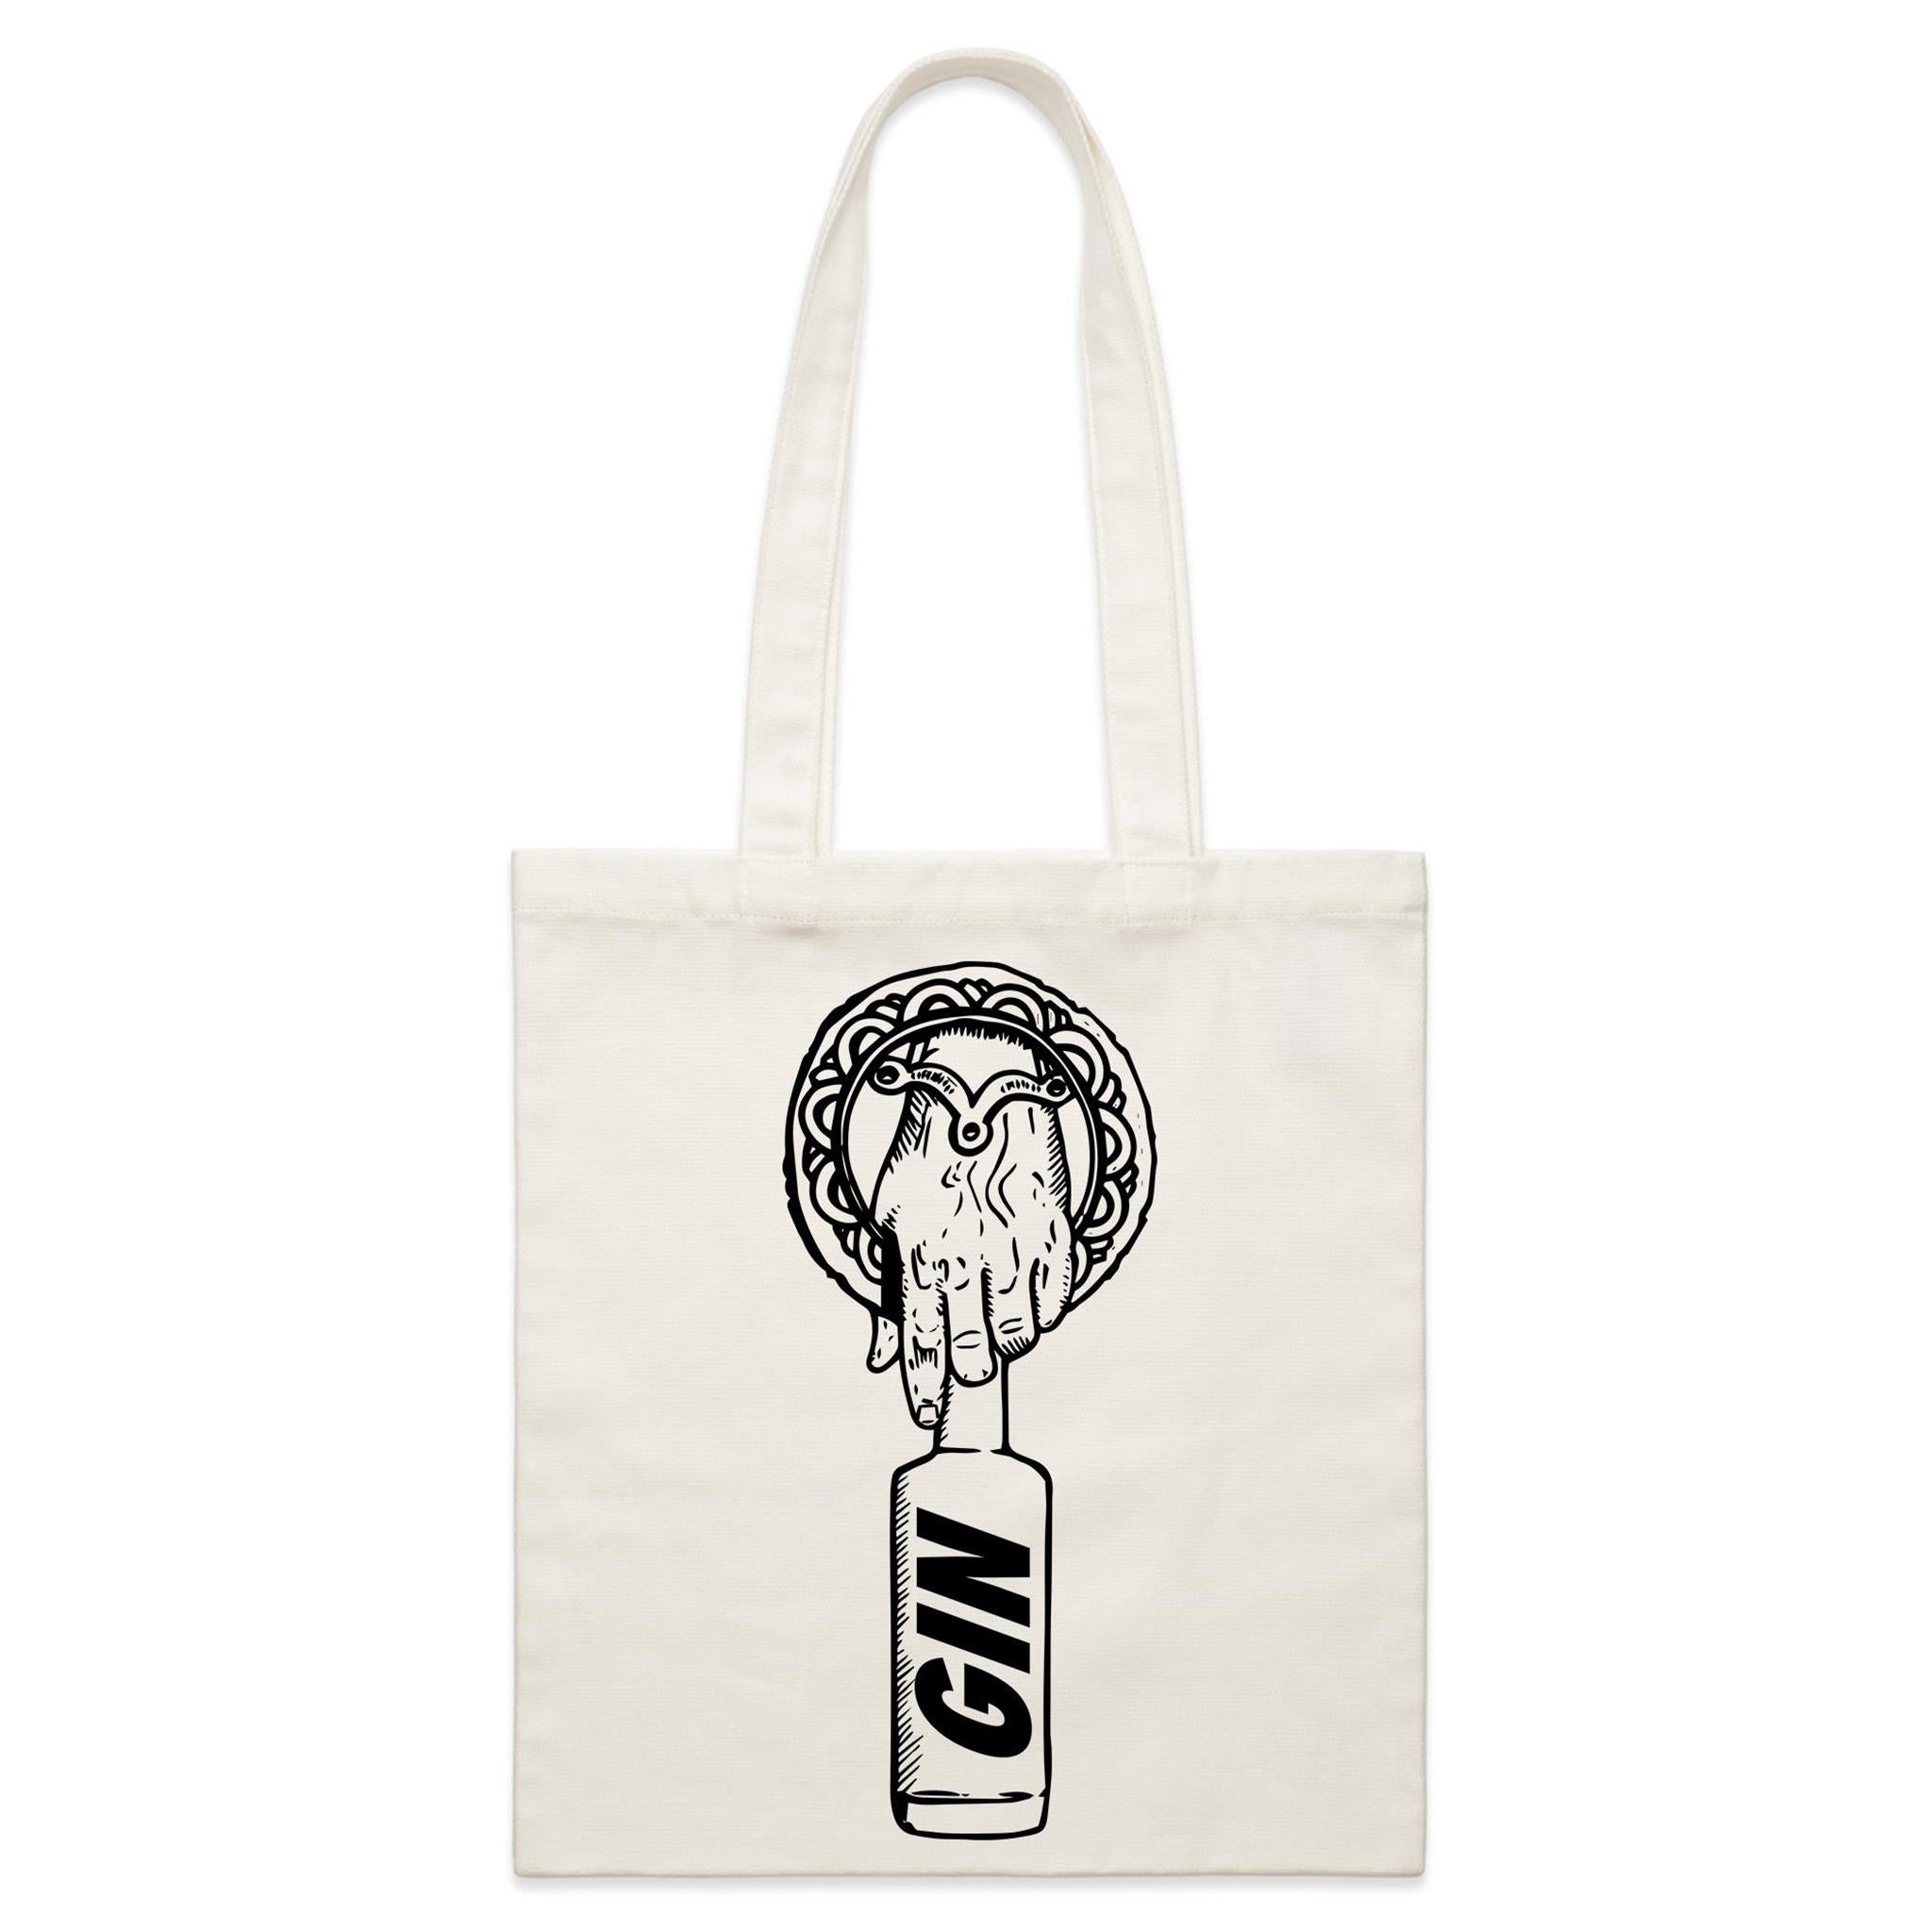 'HAND OF THE GIN' TOTE